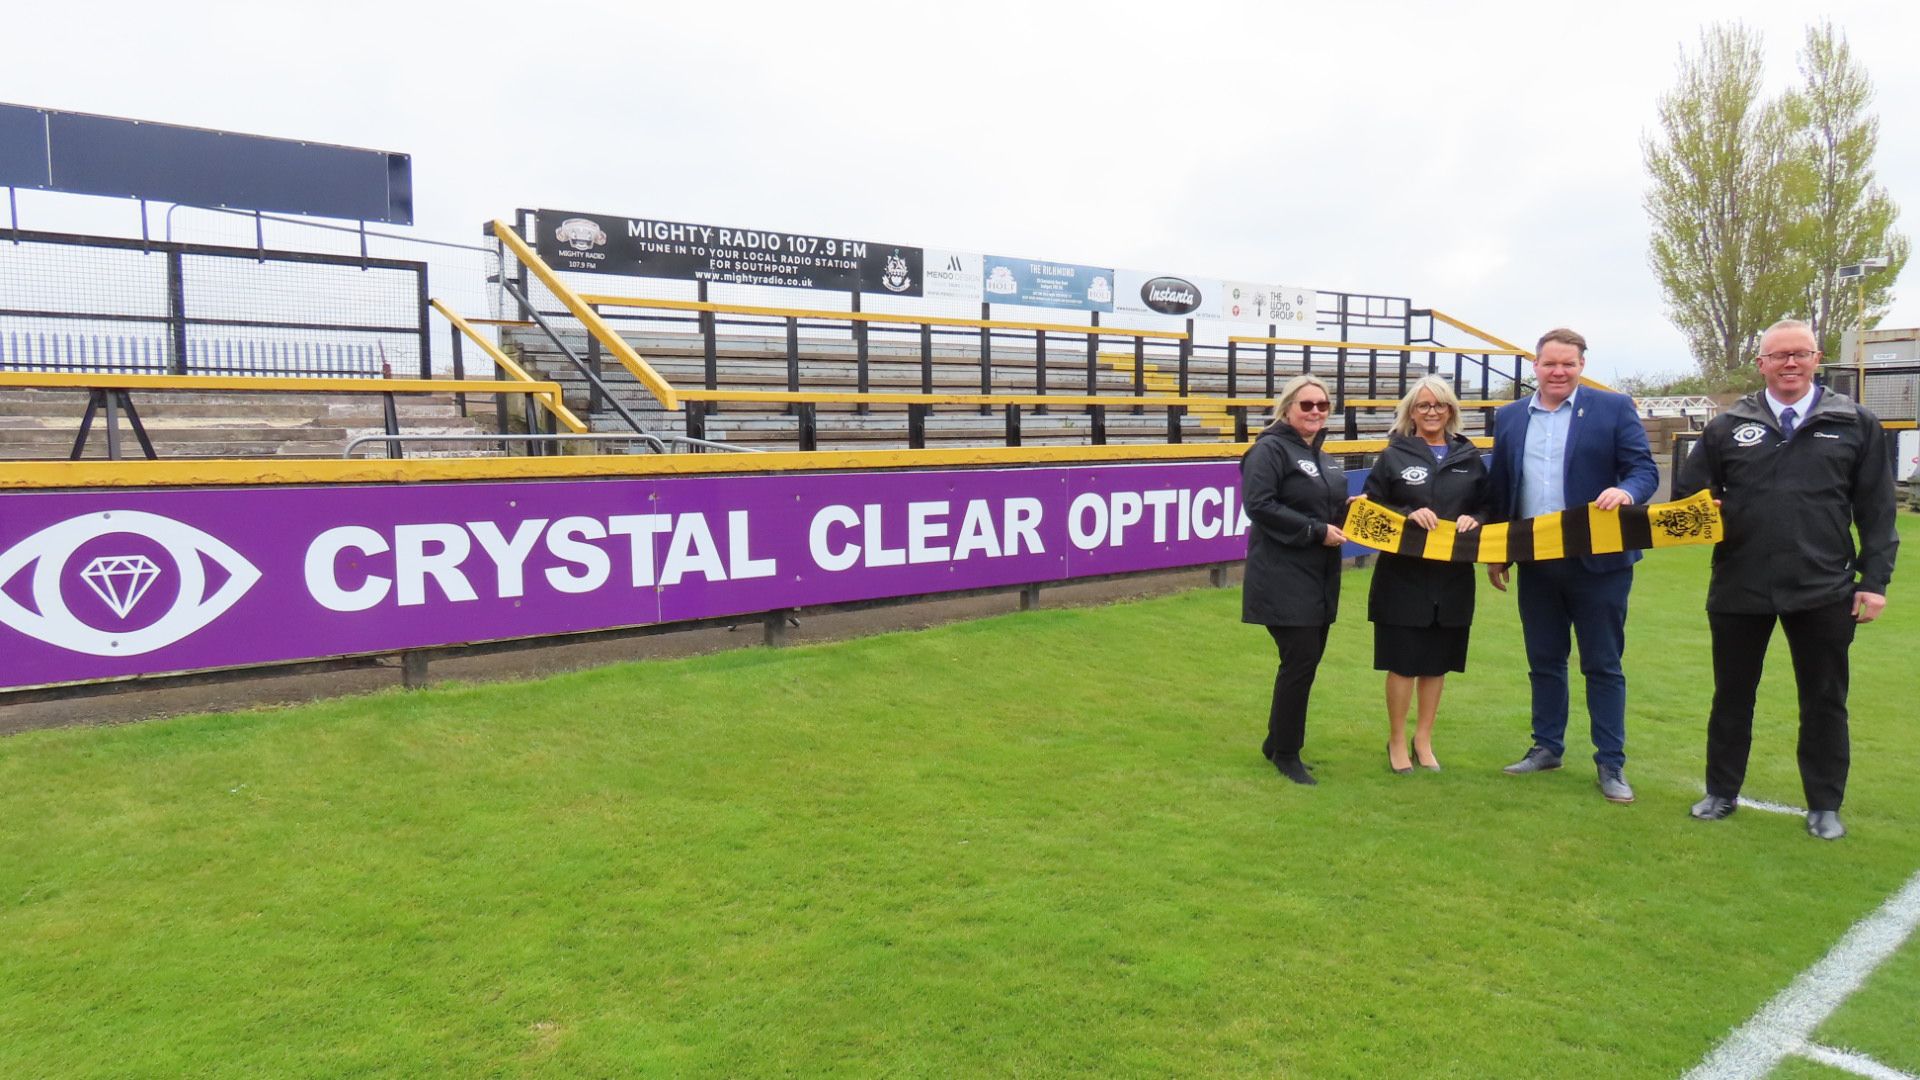 Crystal Clear Opticians in Southport are backing Southport Football Club. Neil Mattack, Paula McKeown and Marta Garrod from Crystal Clear are pictured with Steven Brown from Southport FC. Photo by Andrew Brown of Stand Up For Southport